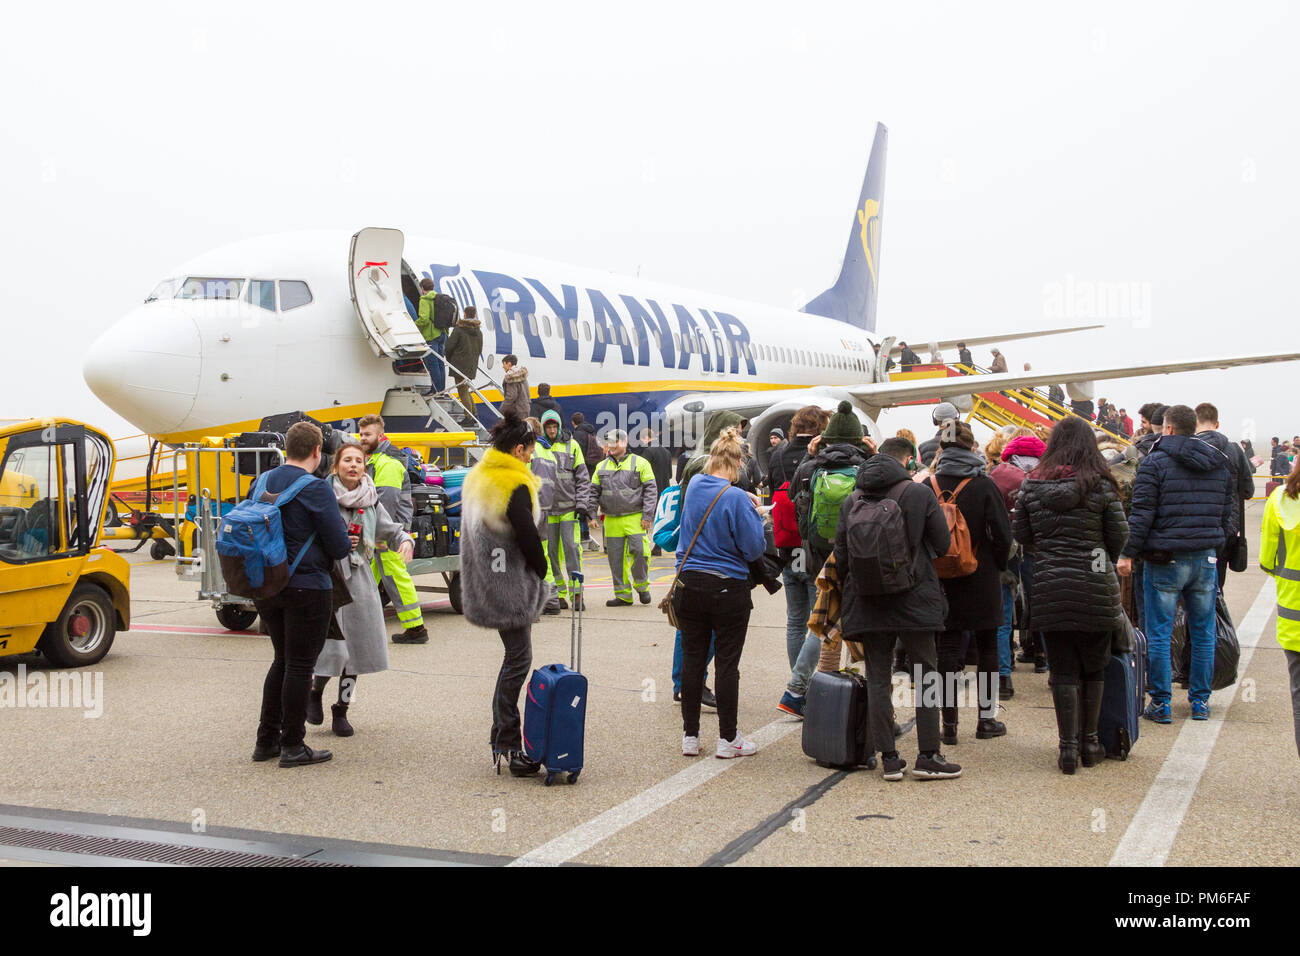 Bratislava, Slovakia. 8 January 2018. A Ryanair Boeing 737-800 aircraft parked at the Bratislava airport runway. People are boarding the plane. Stock Photo